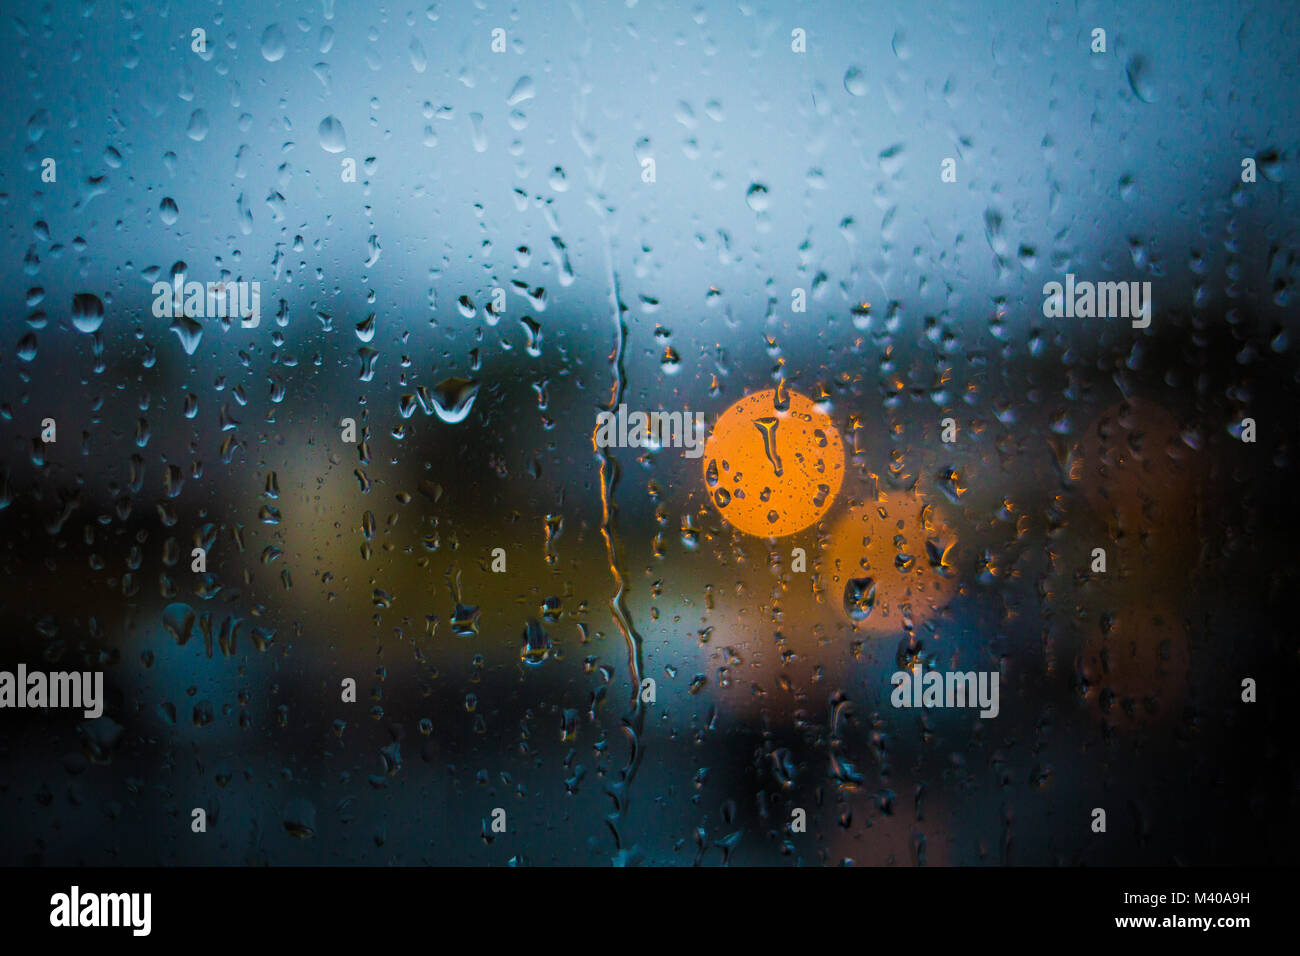 Rain drops on window. Peaceful evening or night at home when raining outside. Water drops on glass. Surface of wet glass. Water splash. City lights bo Stock Photo